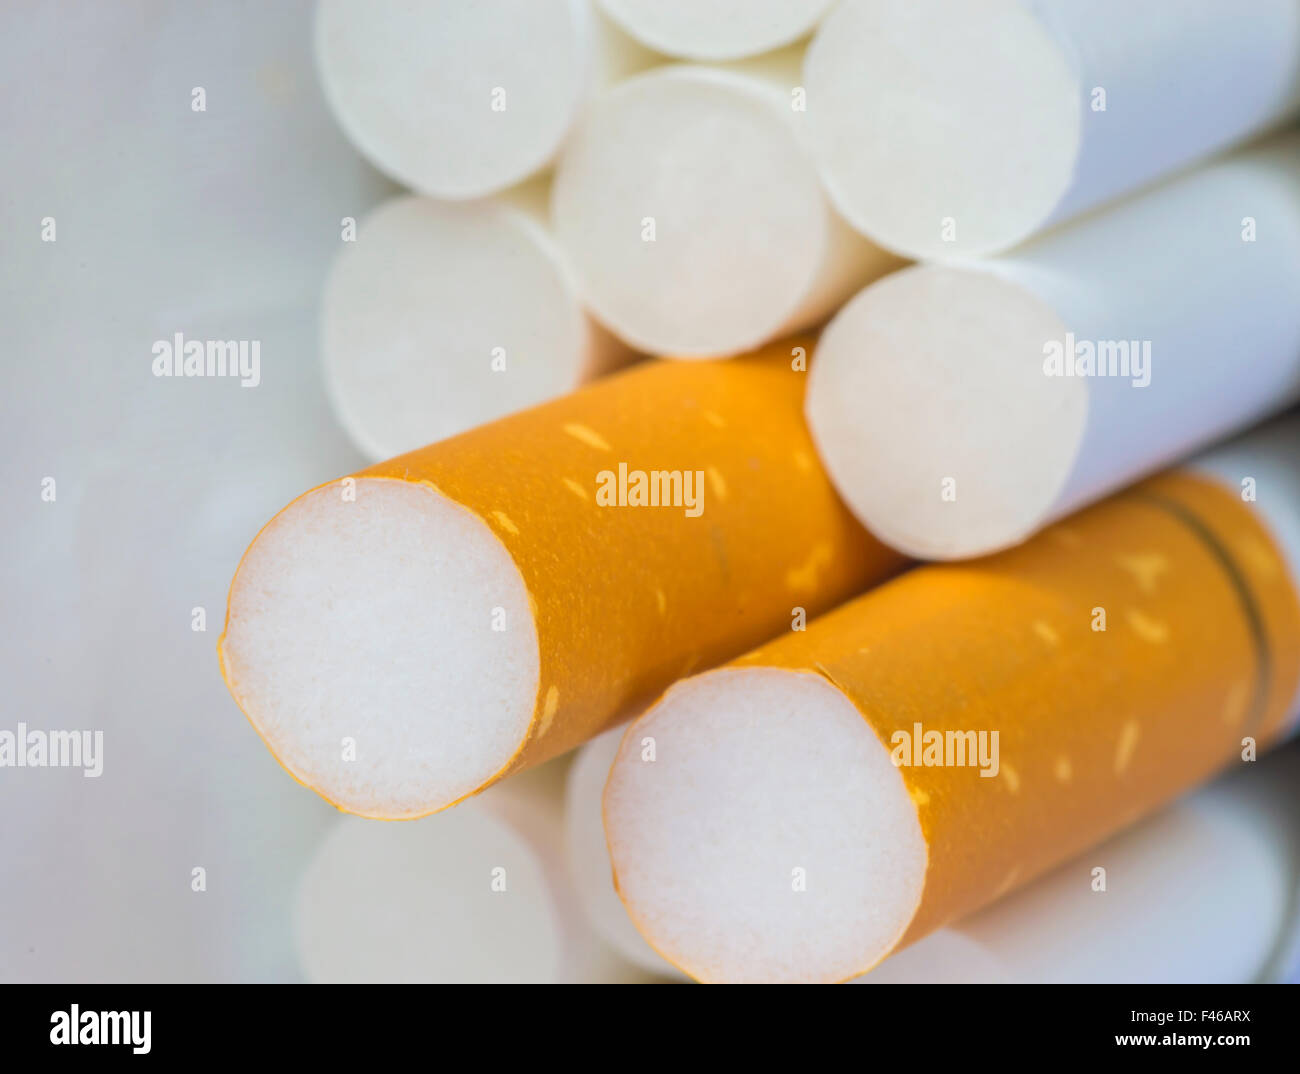 Medicine concept. Cigarettes with a yellow filter lie on a white surface  Stock Photo - Alamy